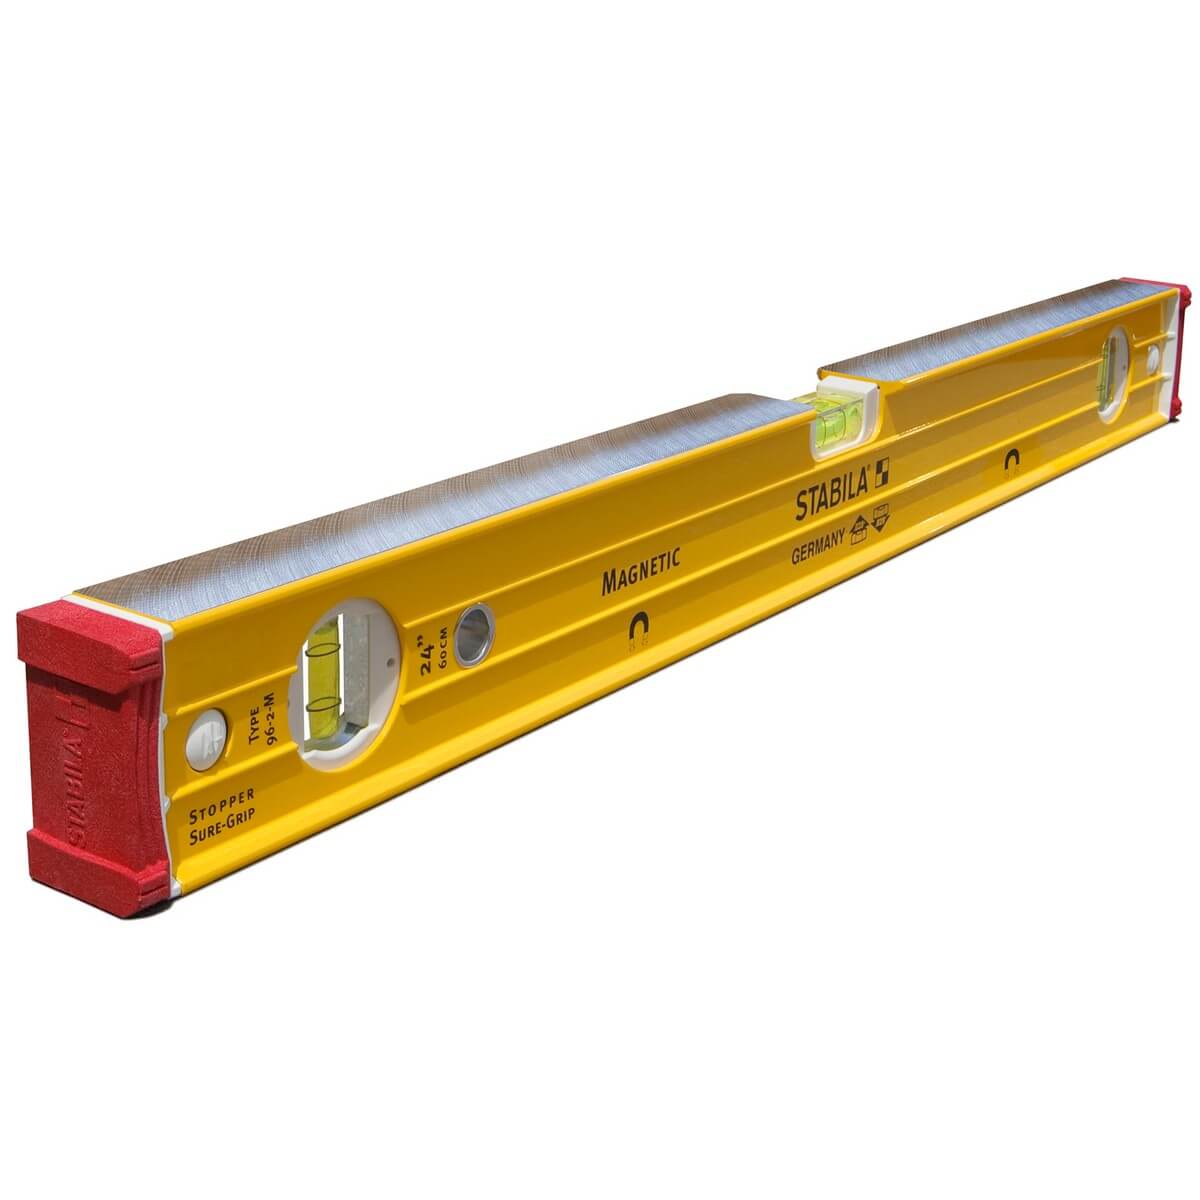 Stabila 38624  - 24" Magnetic Level - Type 96-2-M - wise-line-tools